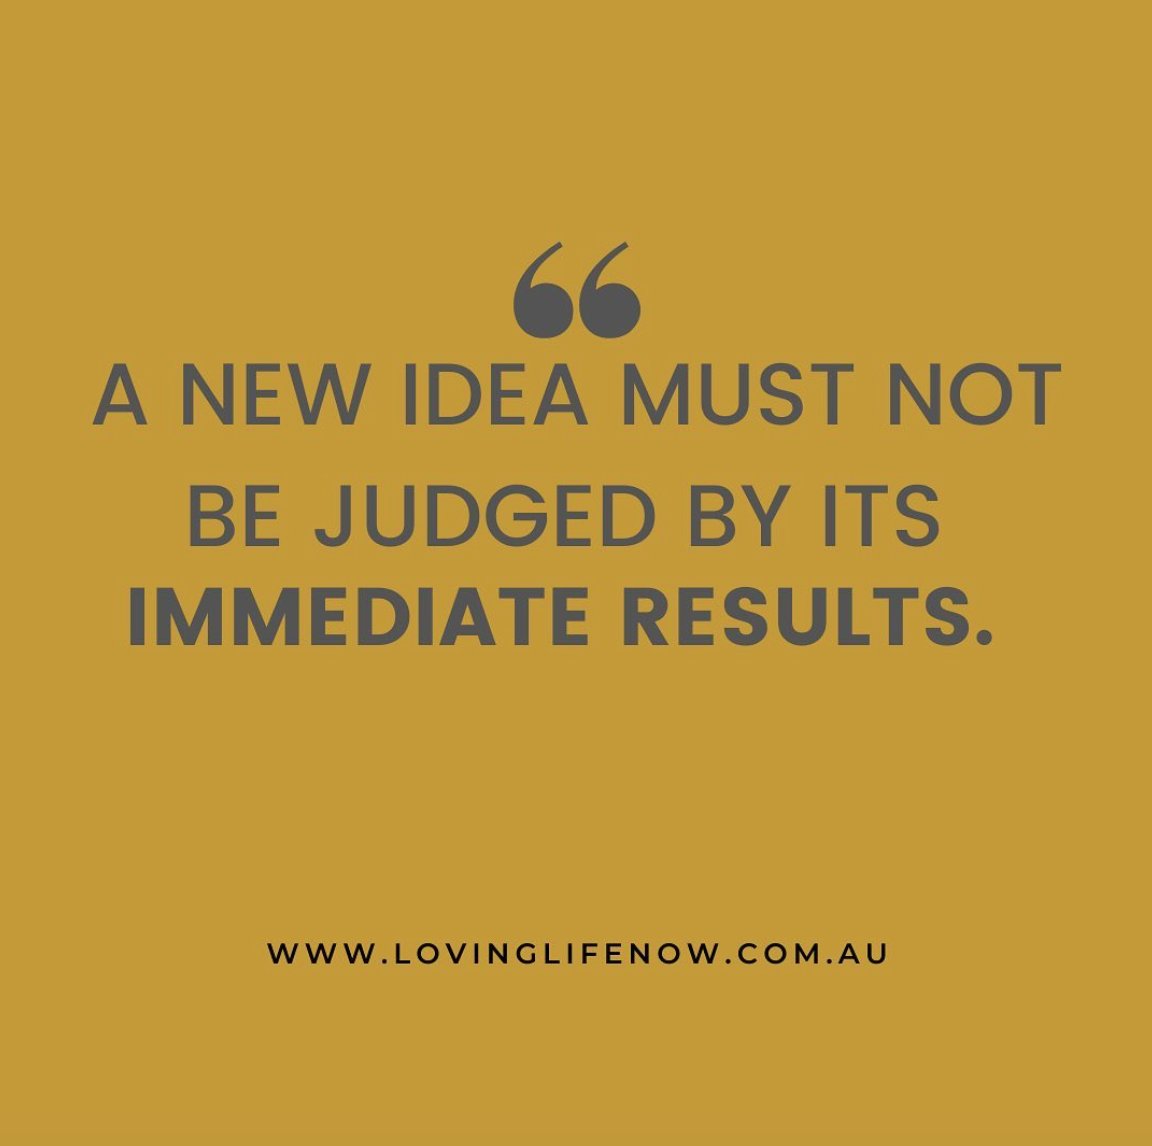 A new idea must not be judged by it's immediate results
-
-
#LivingLovingLife
#OnlineIncomeOpportunity #WorkFromAnywhere #OnlineBusinessSolution
#SimonAndLeeAnne #LifestyleLoveAndBeyond
#LaptopLifestyle #PortableOnlineBusiness
#SimonHaggard #LeeAnneHaggard #LovingLifeNow